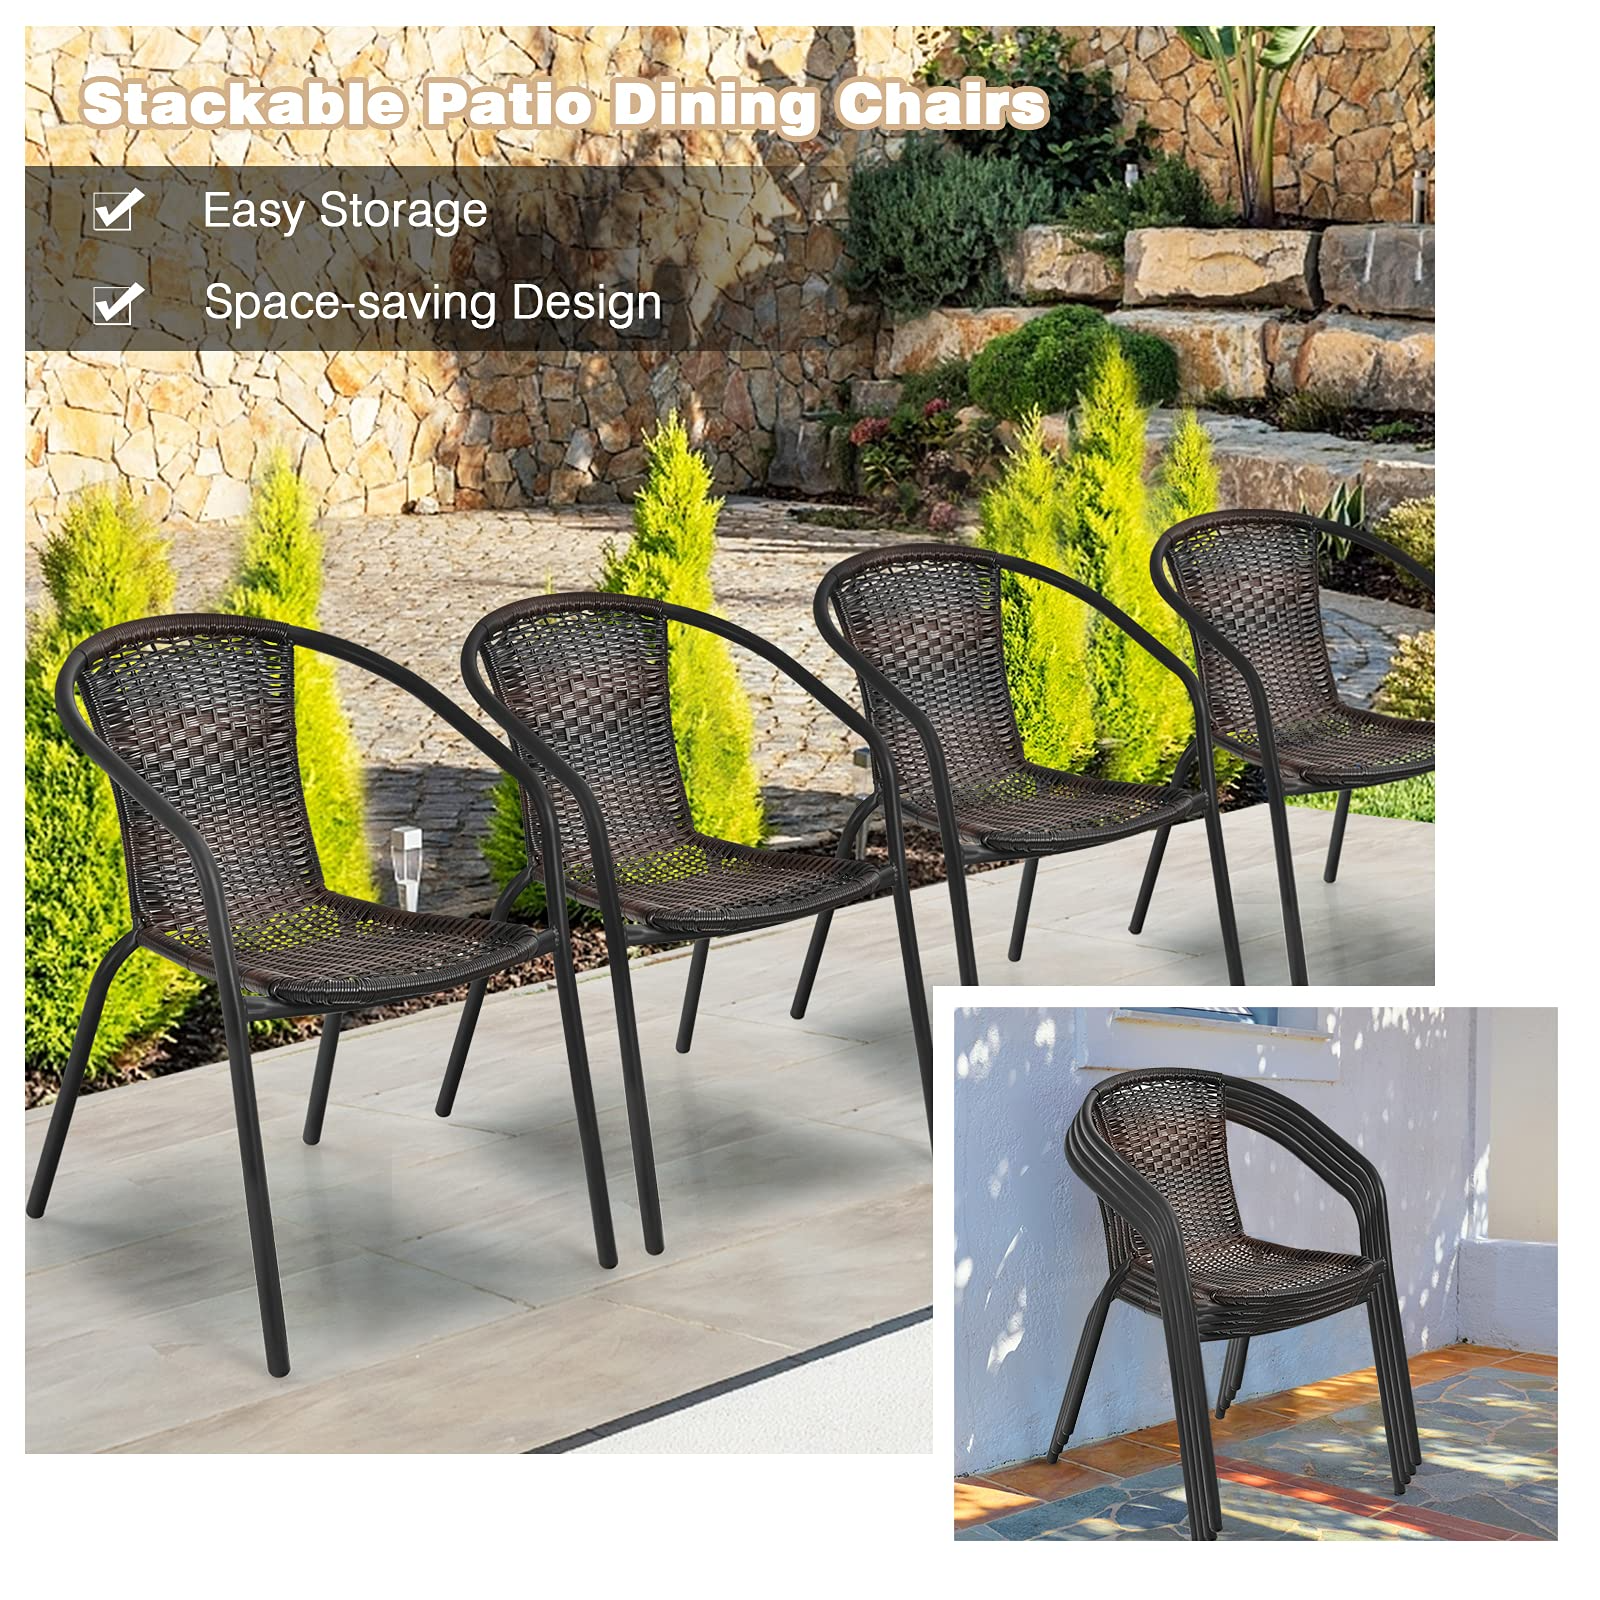 Giantex Outdoor Chairs Rattan Dining Chair